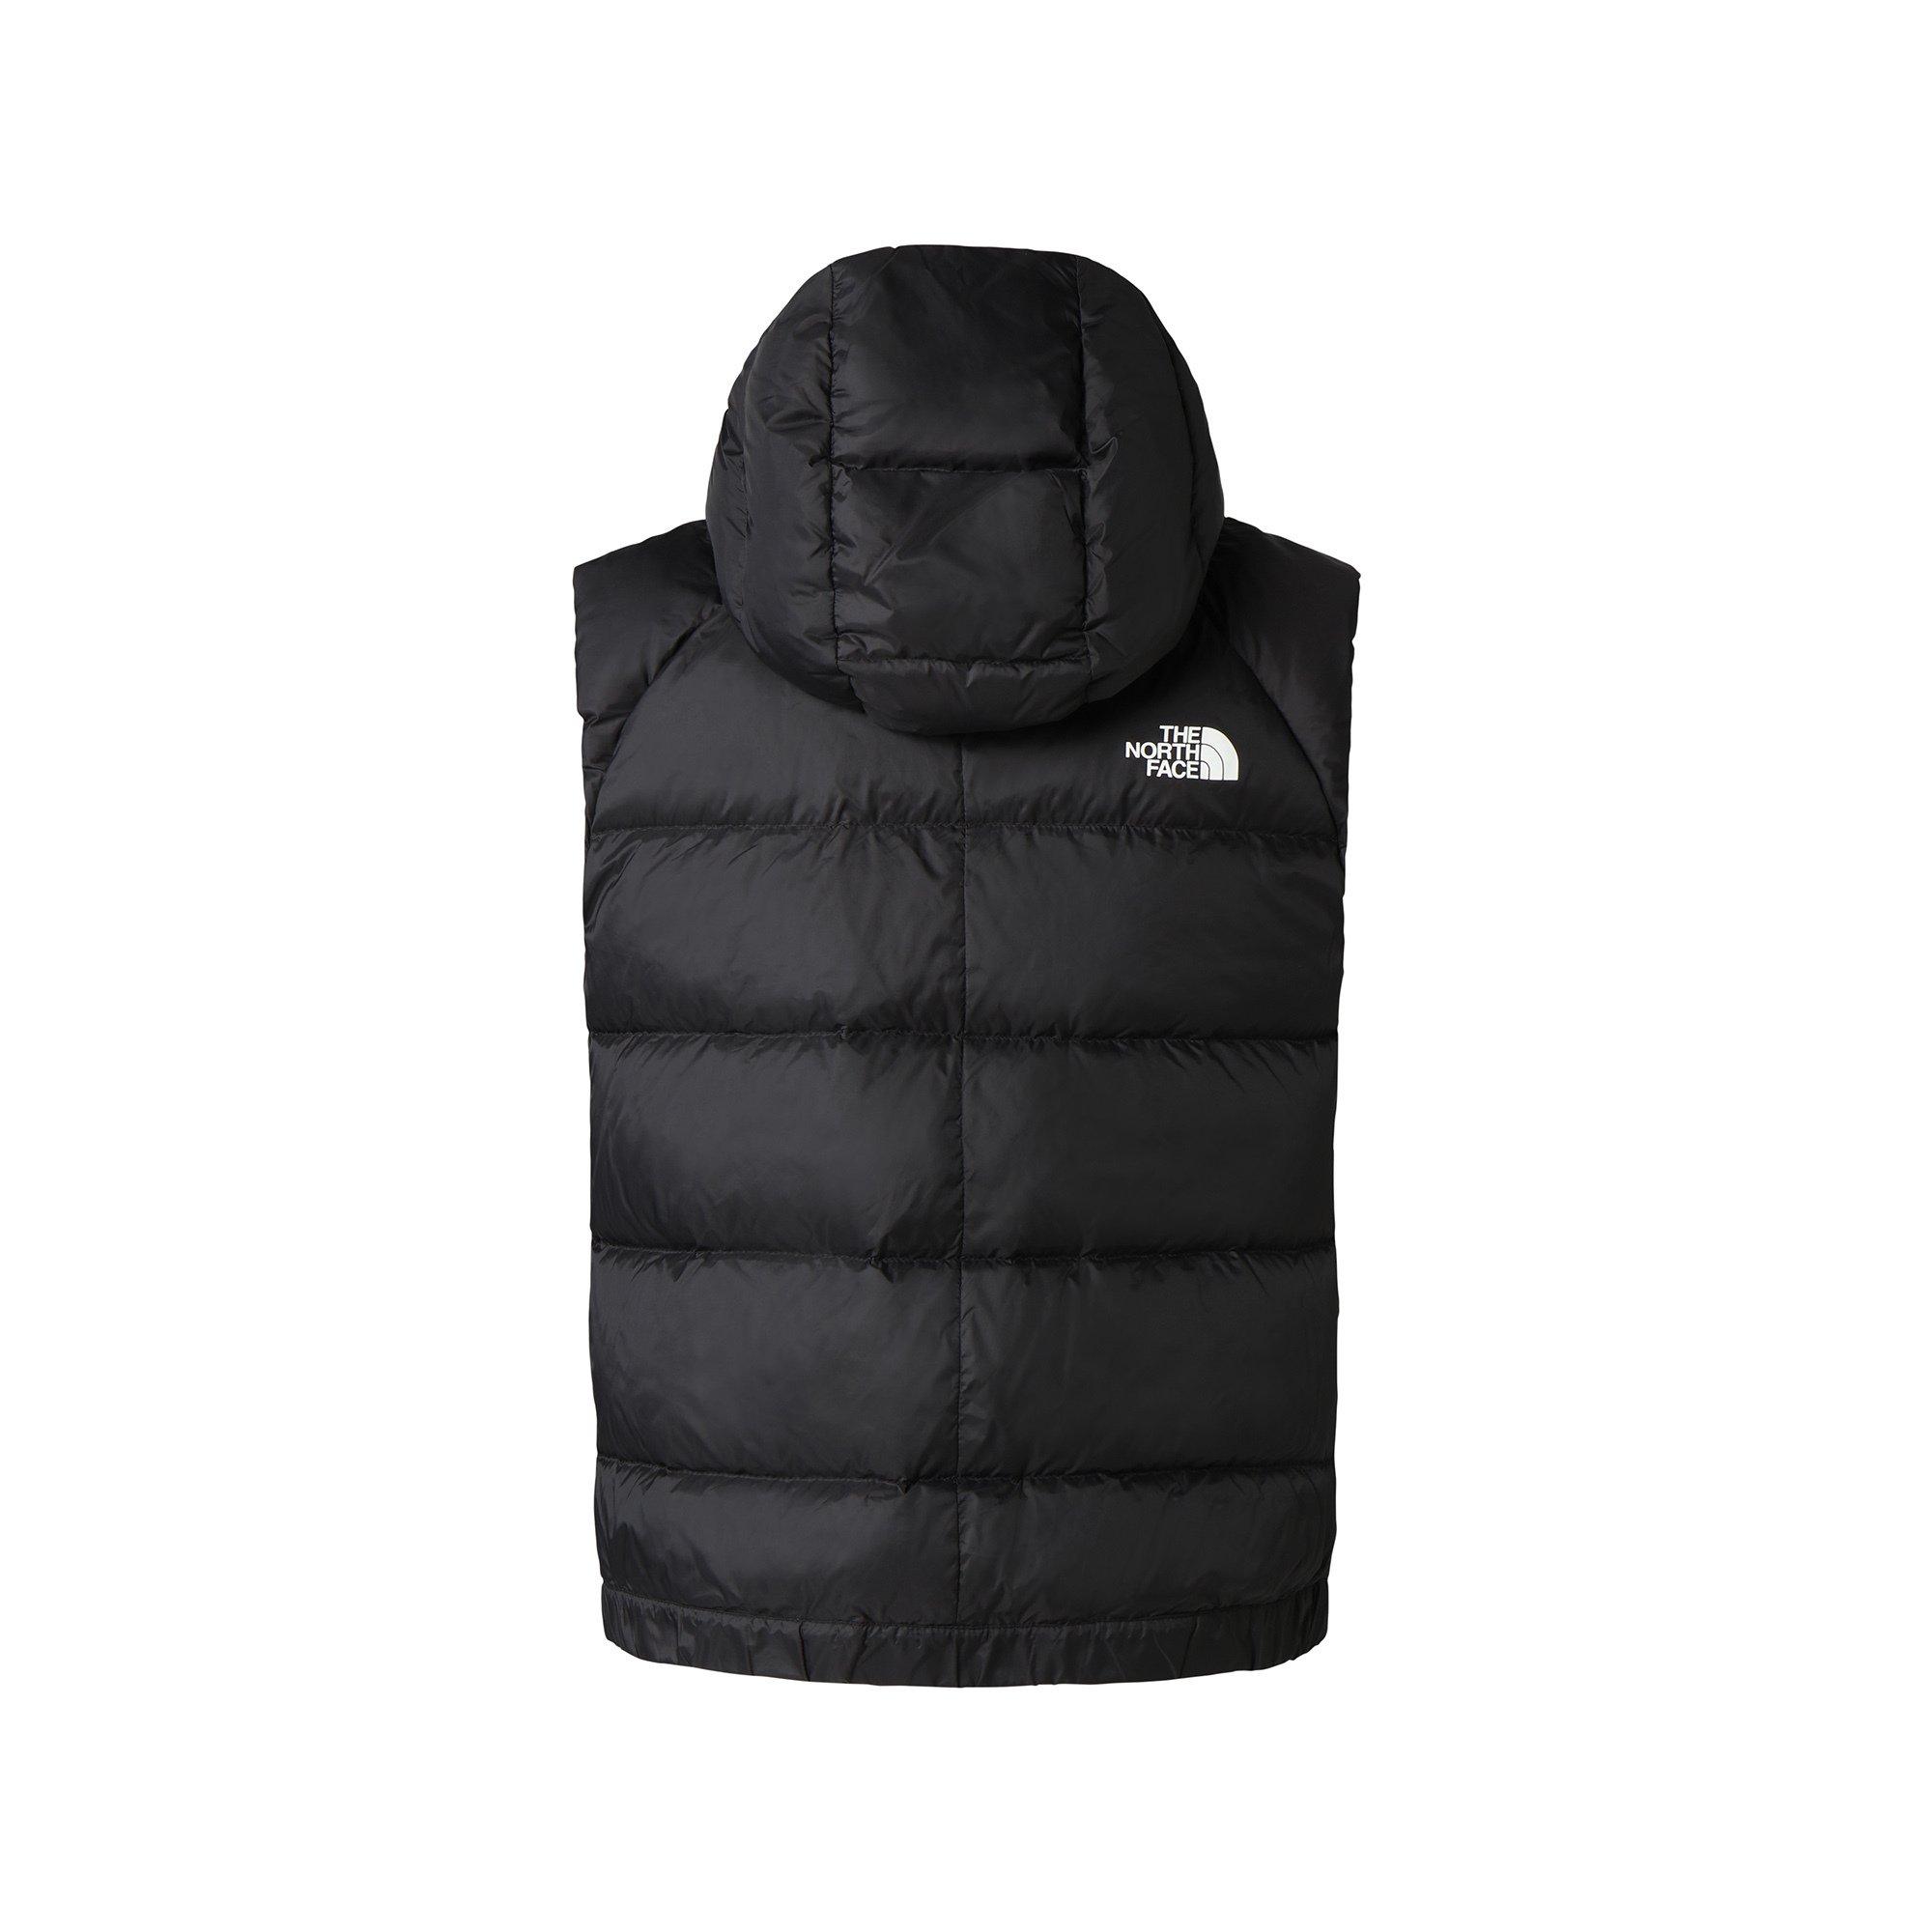 THE NORTH FACE W HYALITE VEST
 Gilet imbottito 